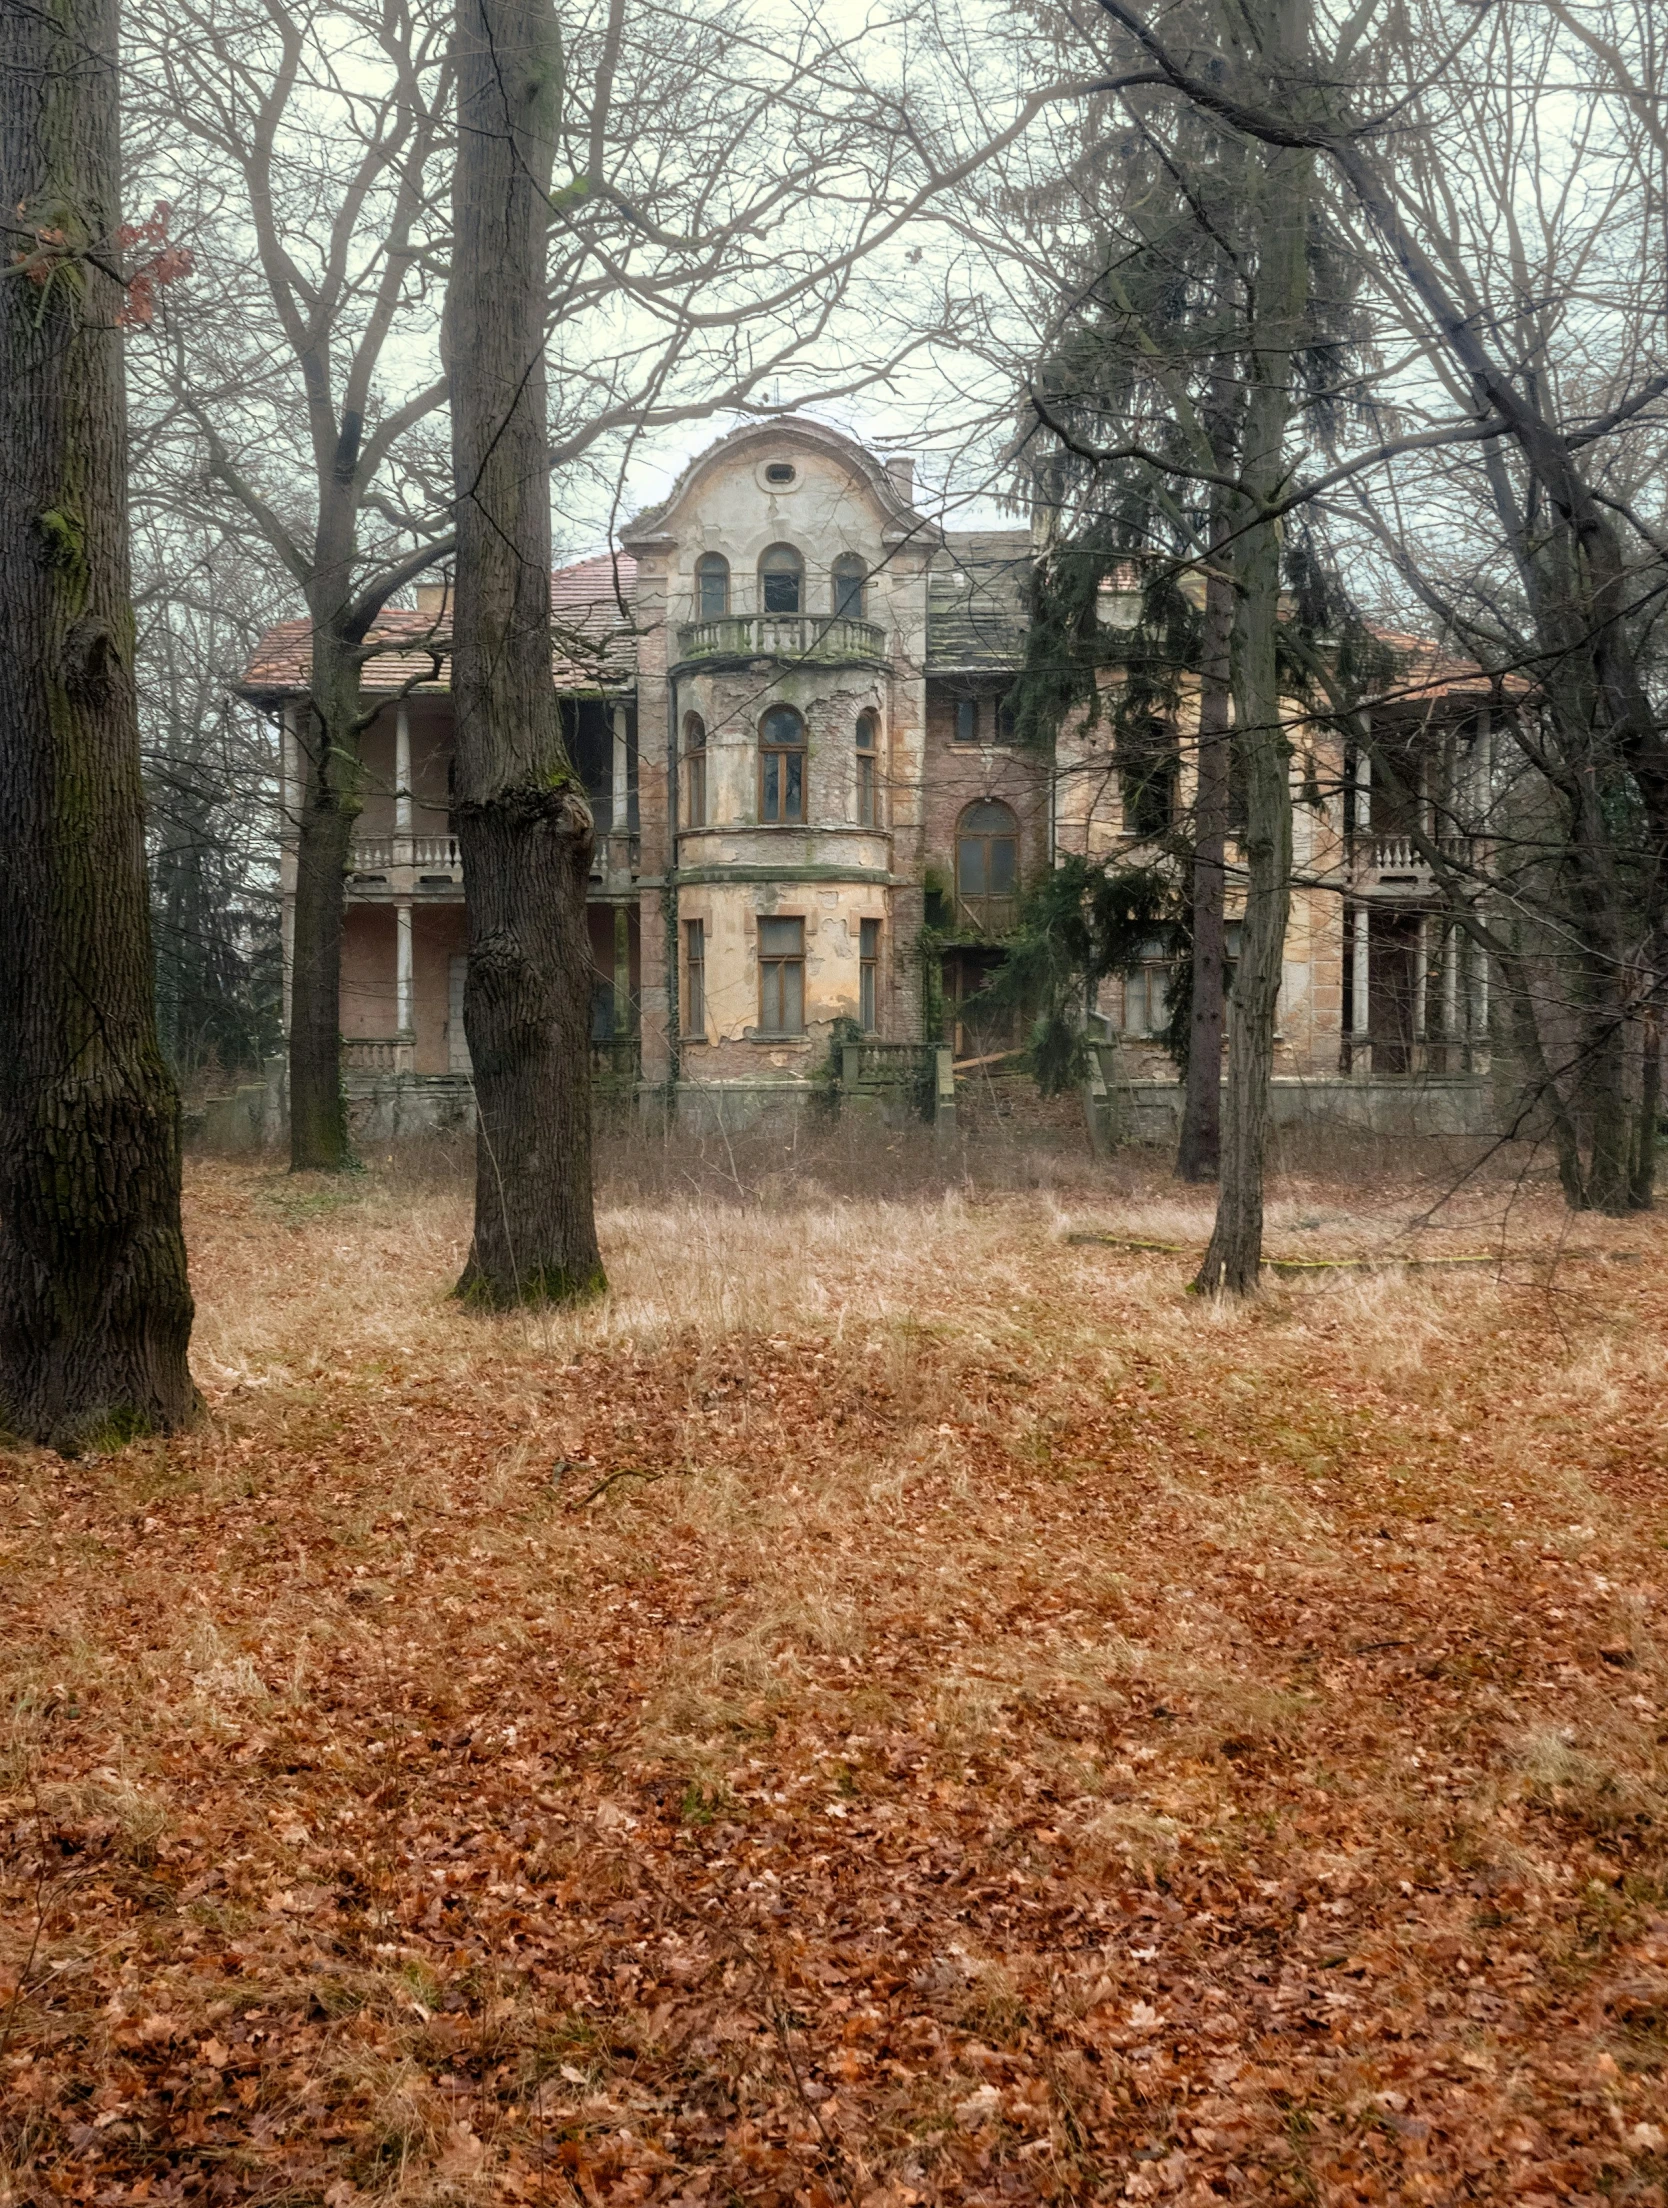 an old, abandoned house in autumn with leaves on the ground